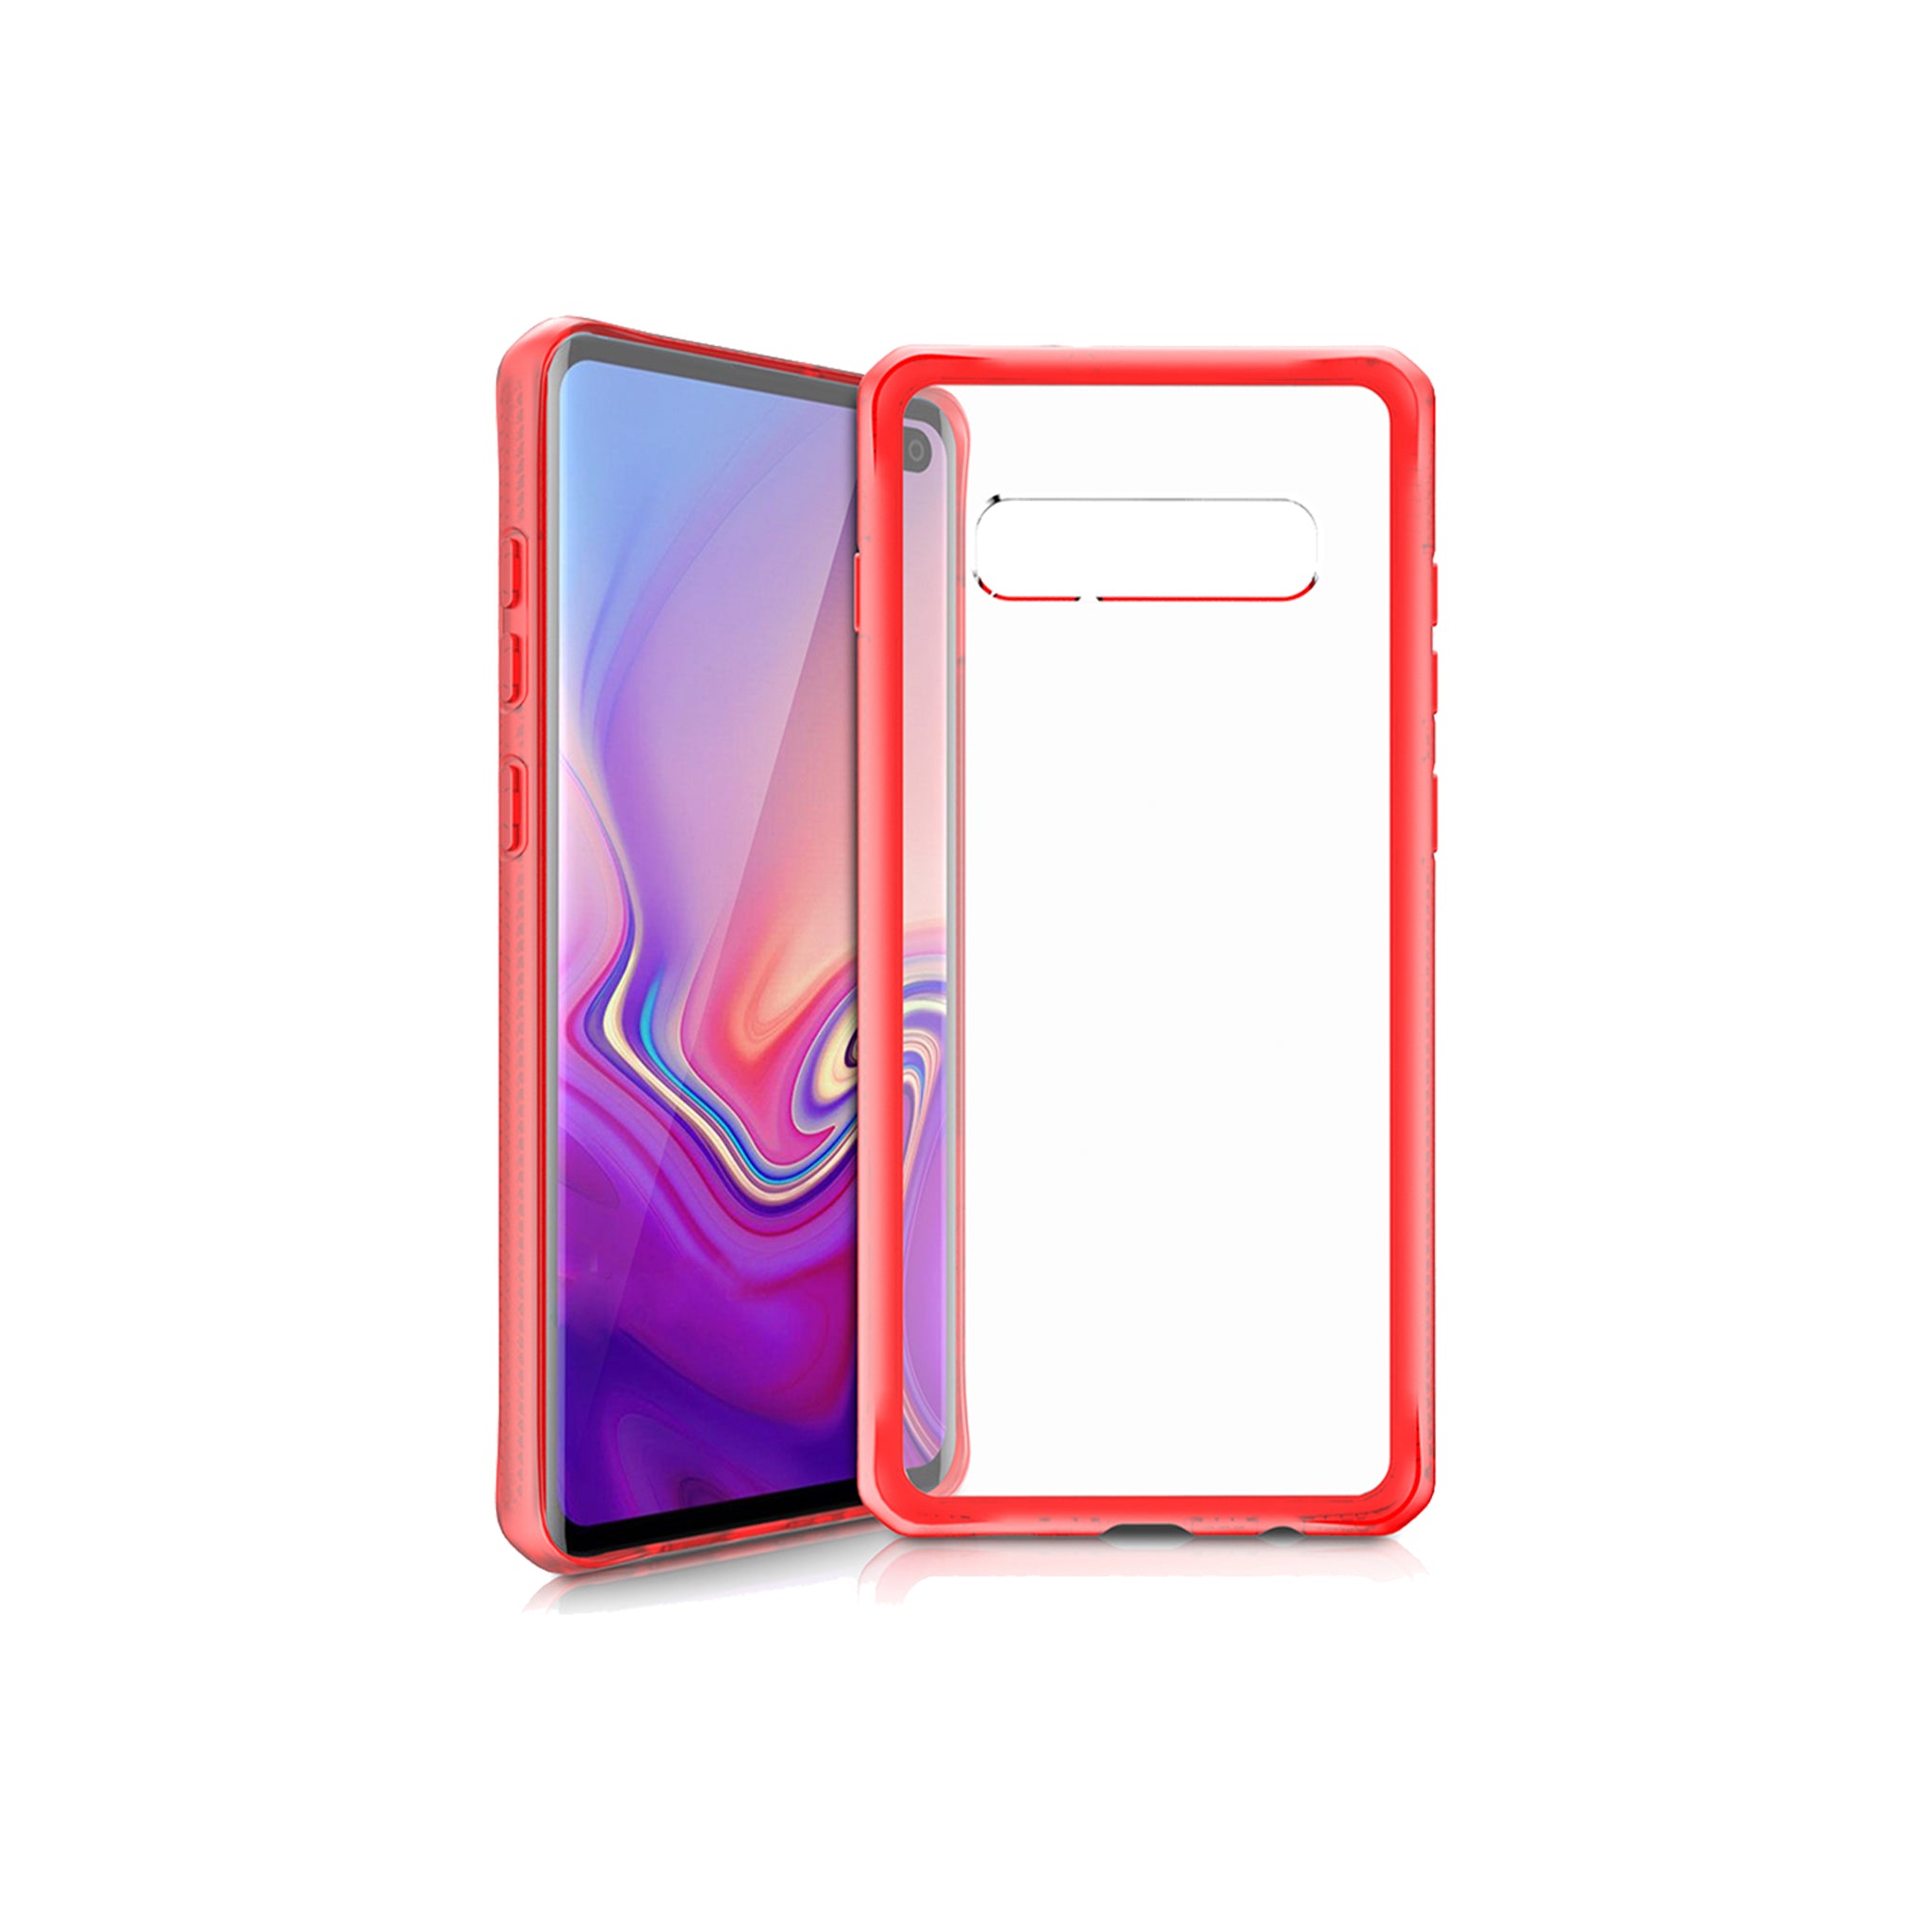 Itskins - Hybrid Frost Mkii Case For Samsung Galaxy S10 Plus - Red And Transparent